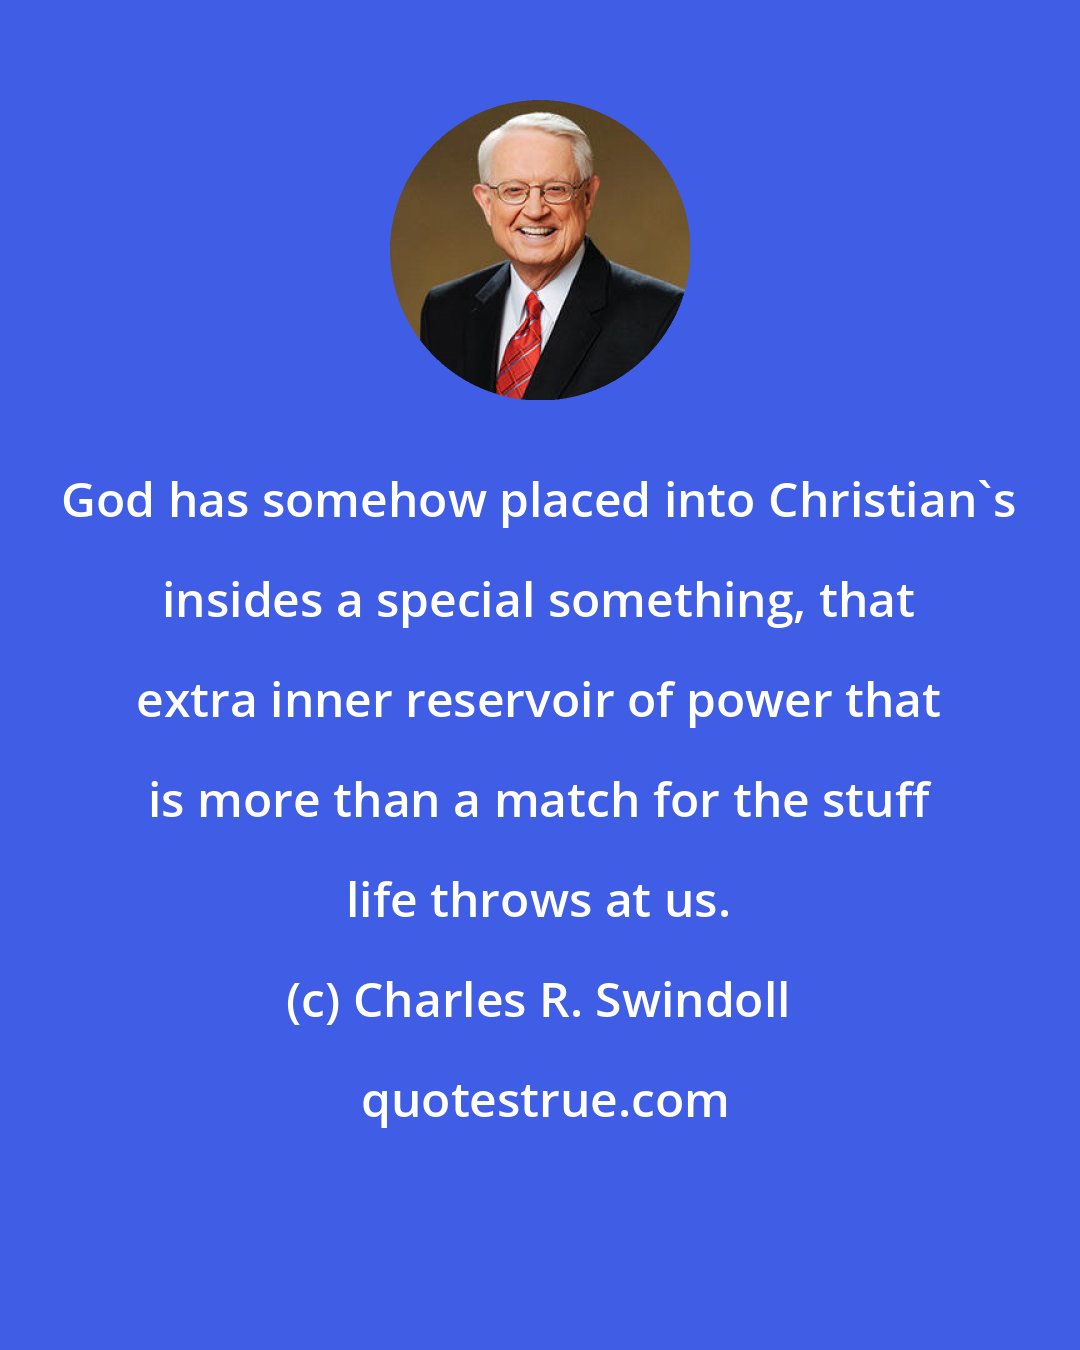 Charles R. Swindoll: God has somehow placed into Christian's insides a special something, that extra inner reservoir of power that is more than a match for the stuff life throws at us.